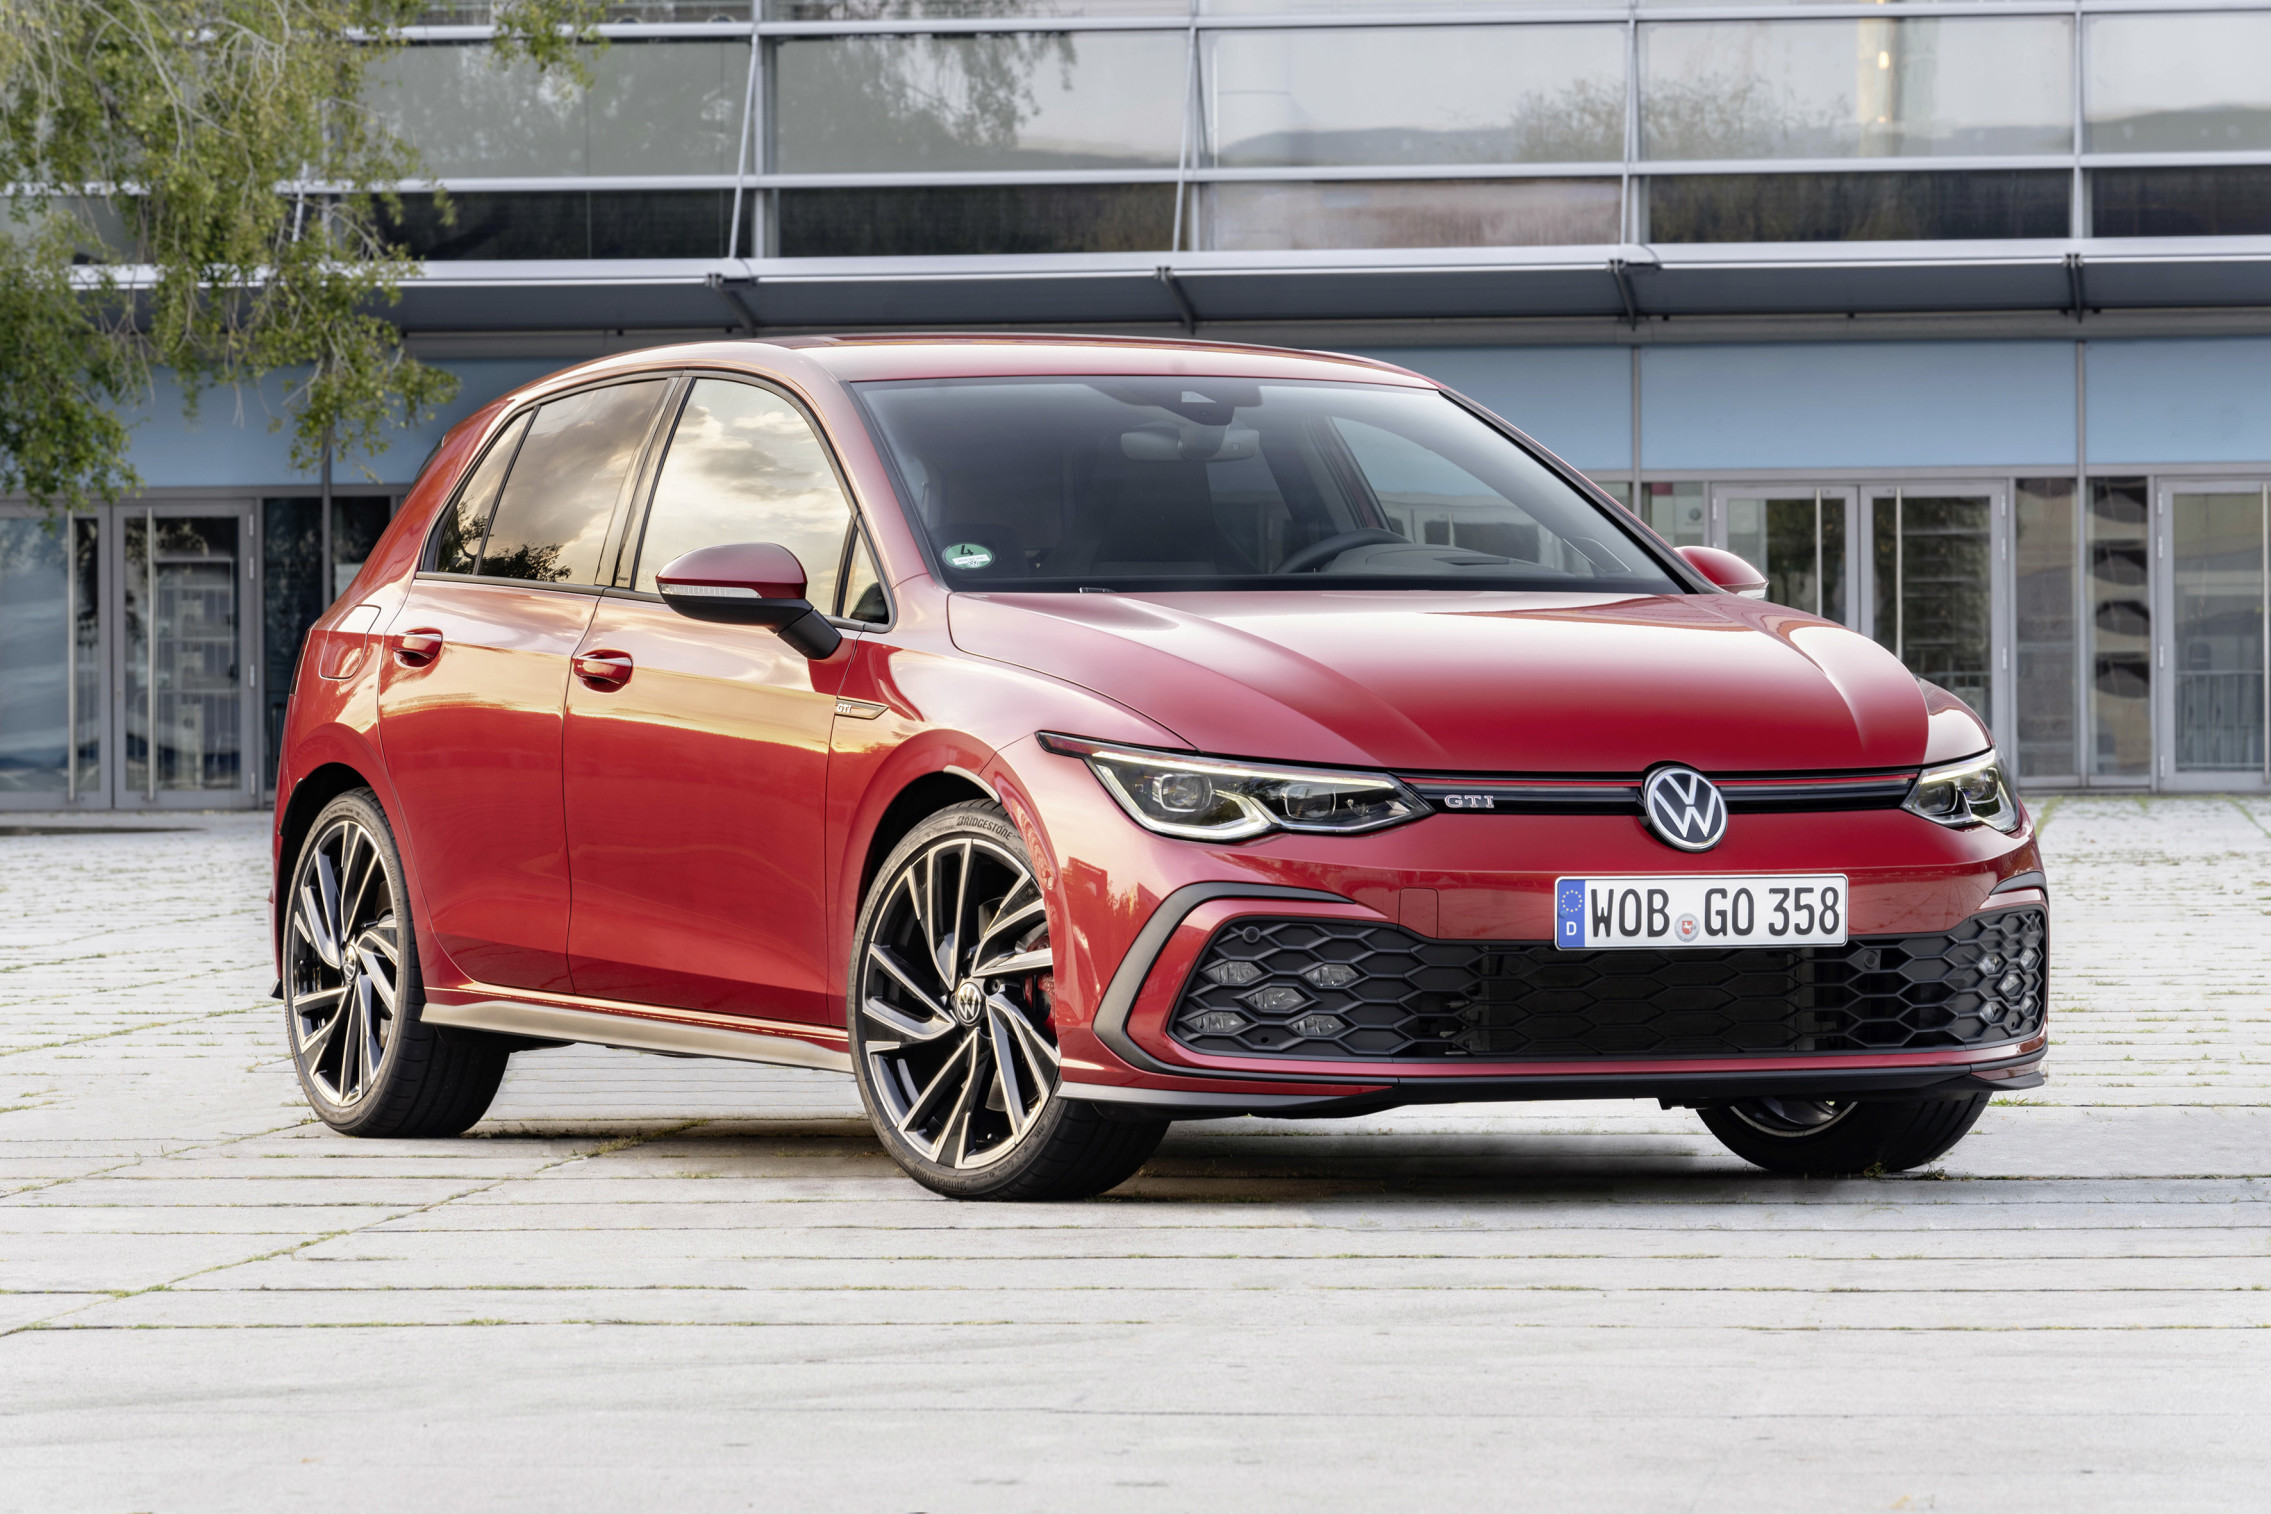 New Golf 8 GTI is coming to South Africa in mid-2021